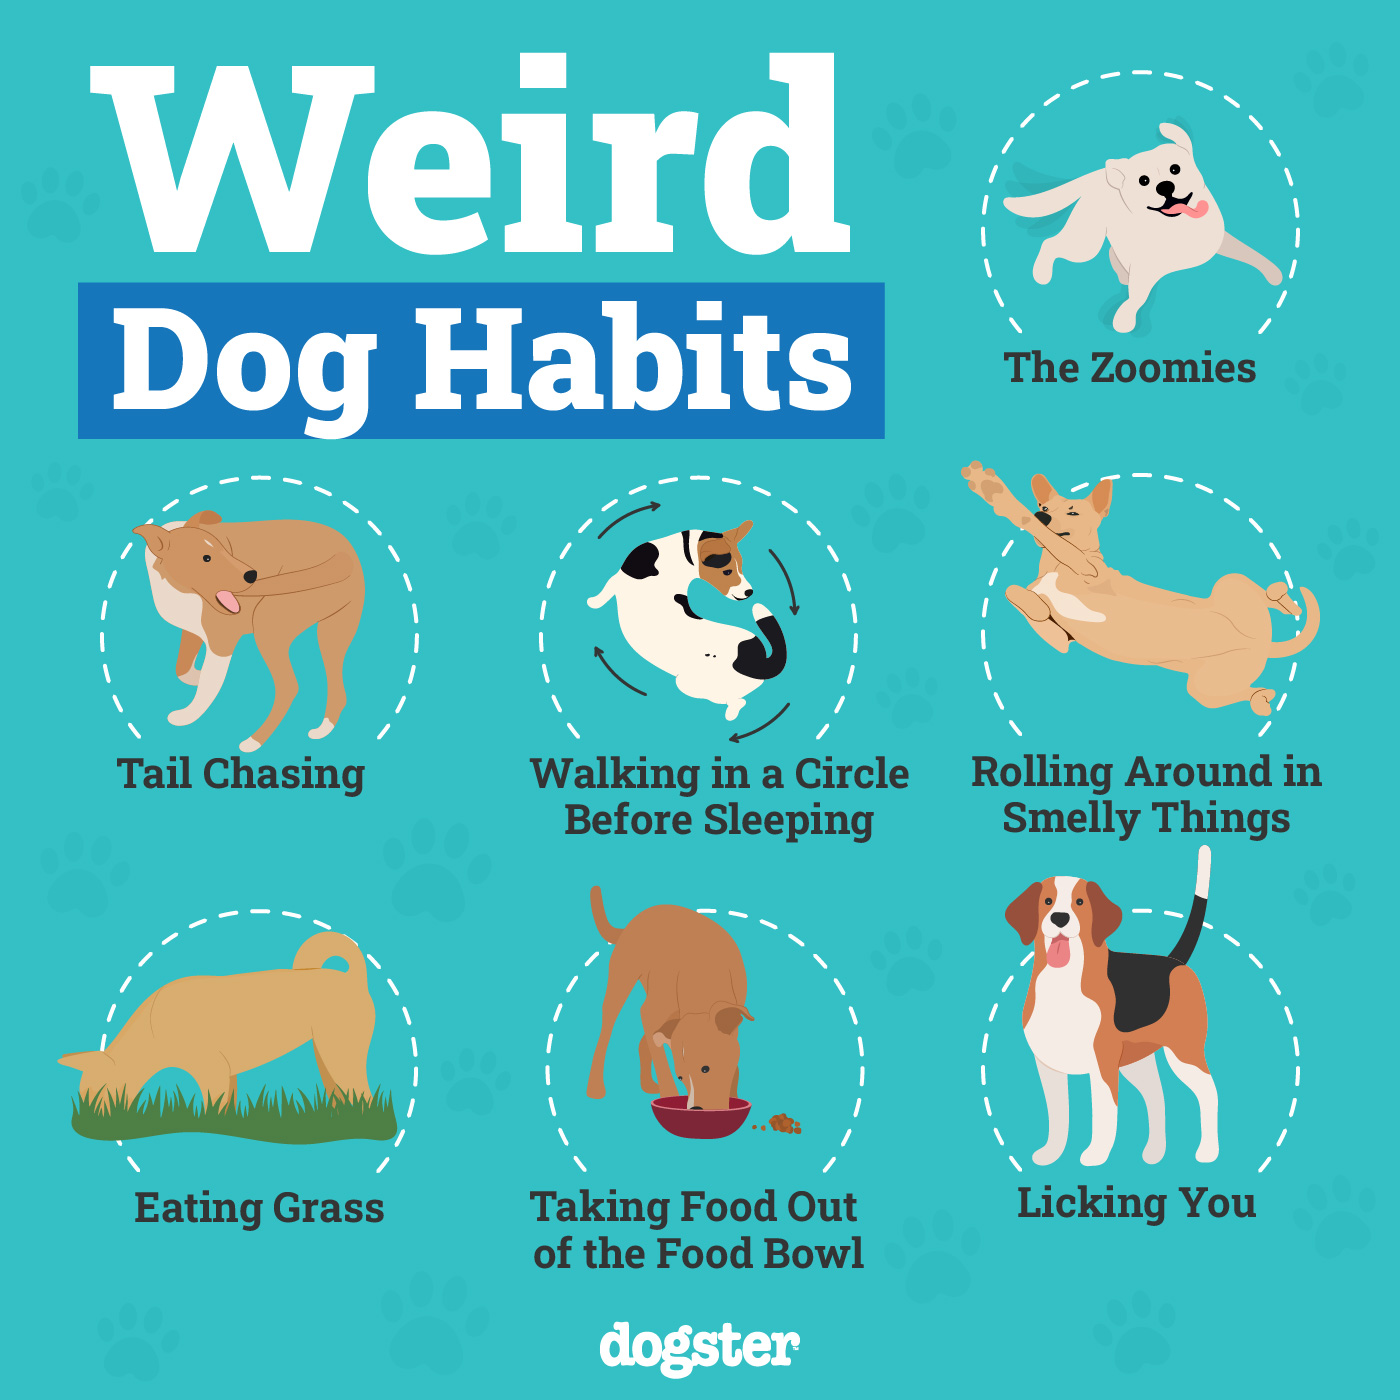 Dogster_Weird Dog Habits_Infographic